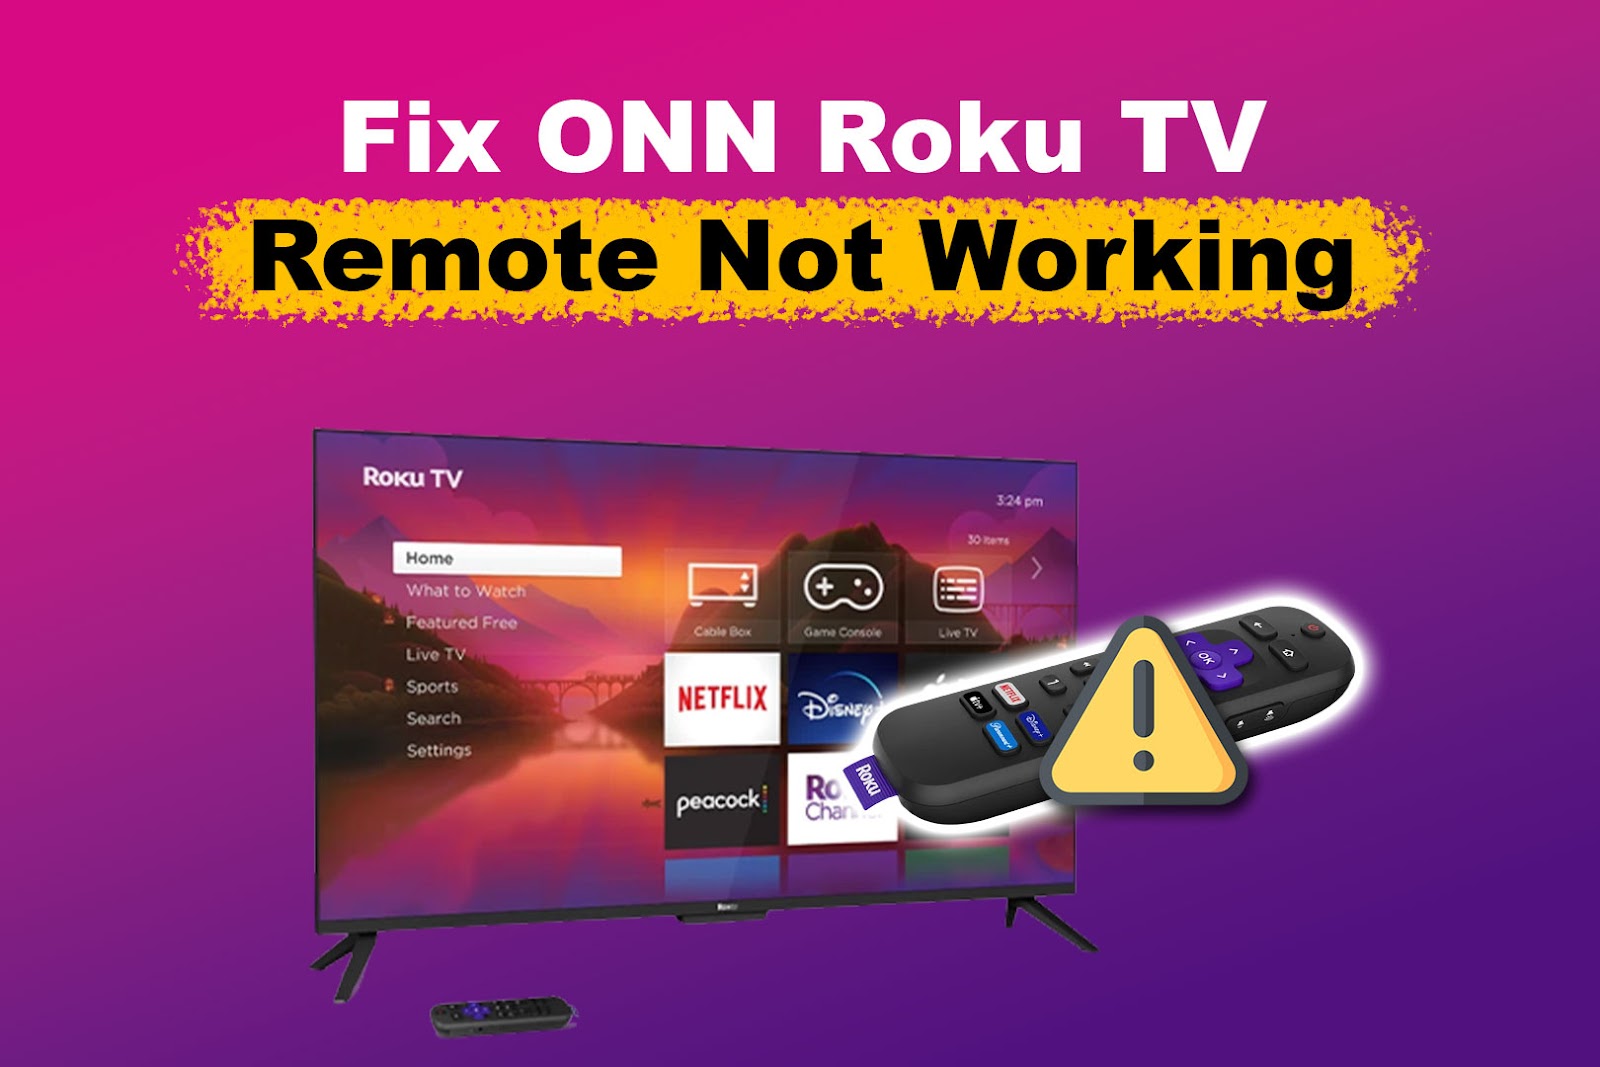 How to Fix Onn Roku TV Remote Not Working